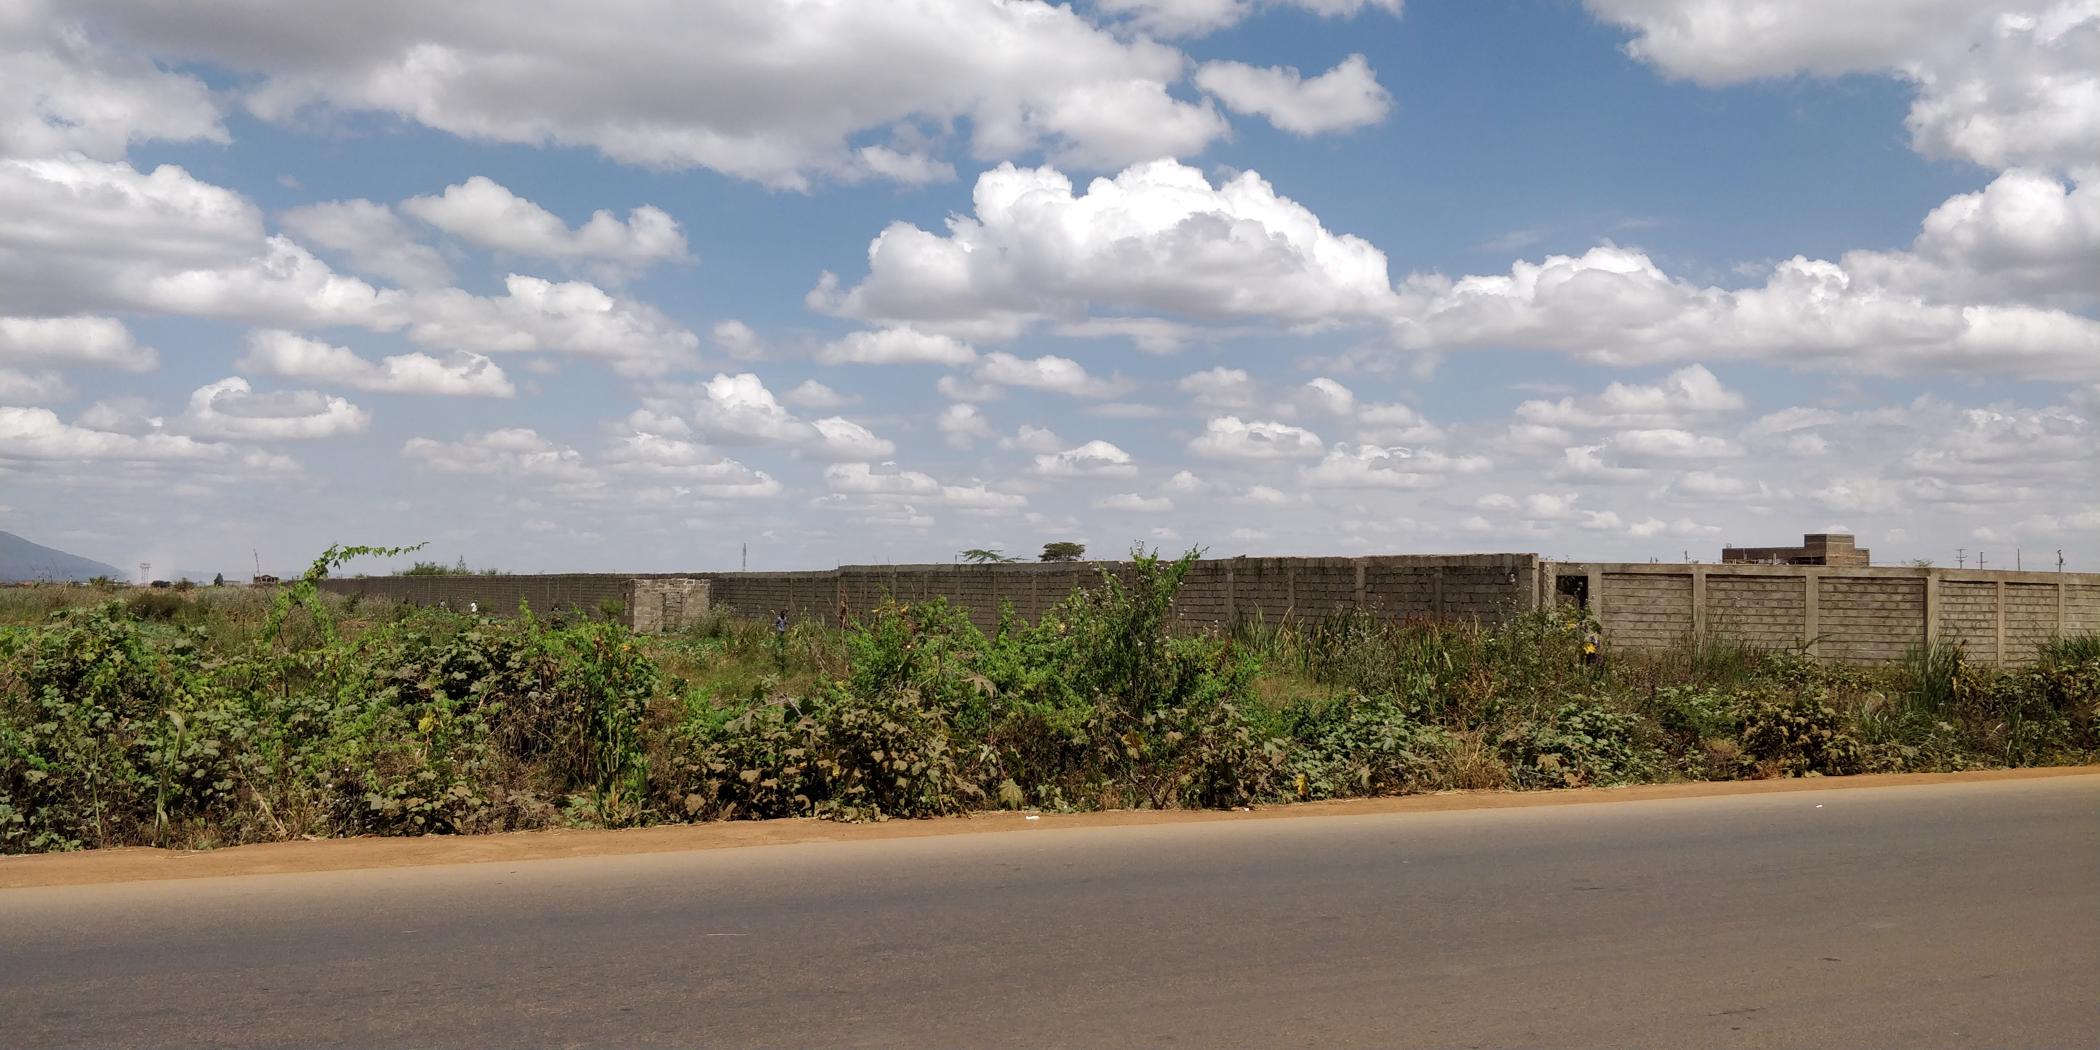 12.5 acres commercial vacant land for sale in Thika (Kenya)